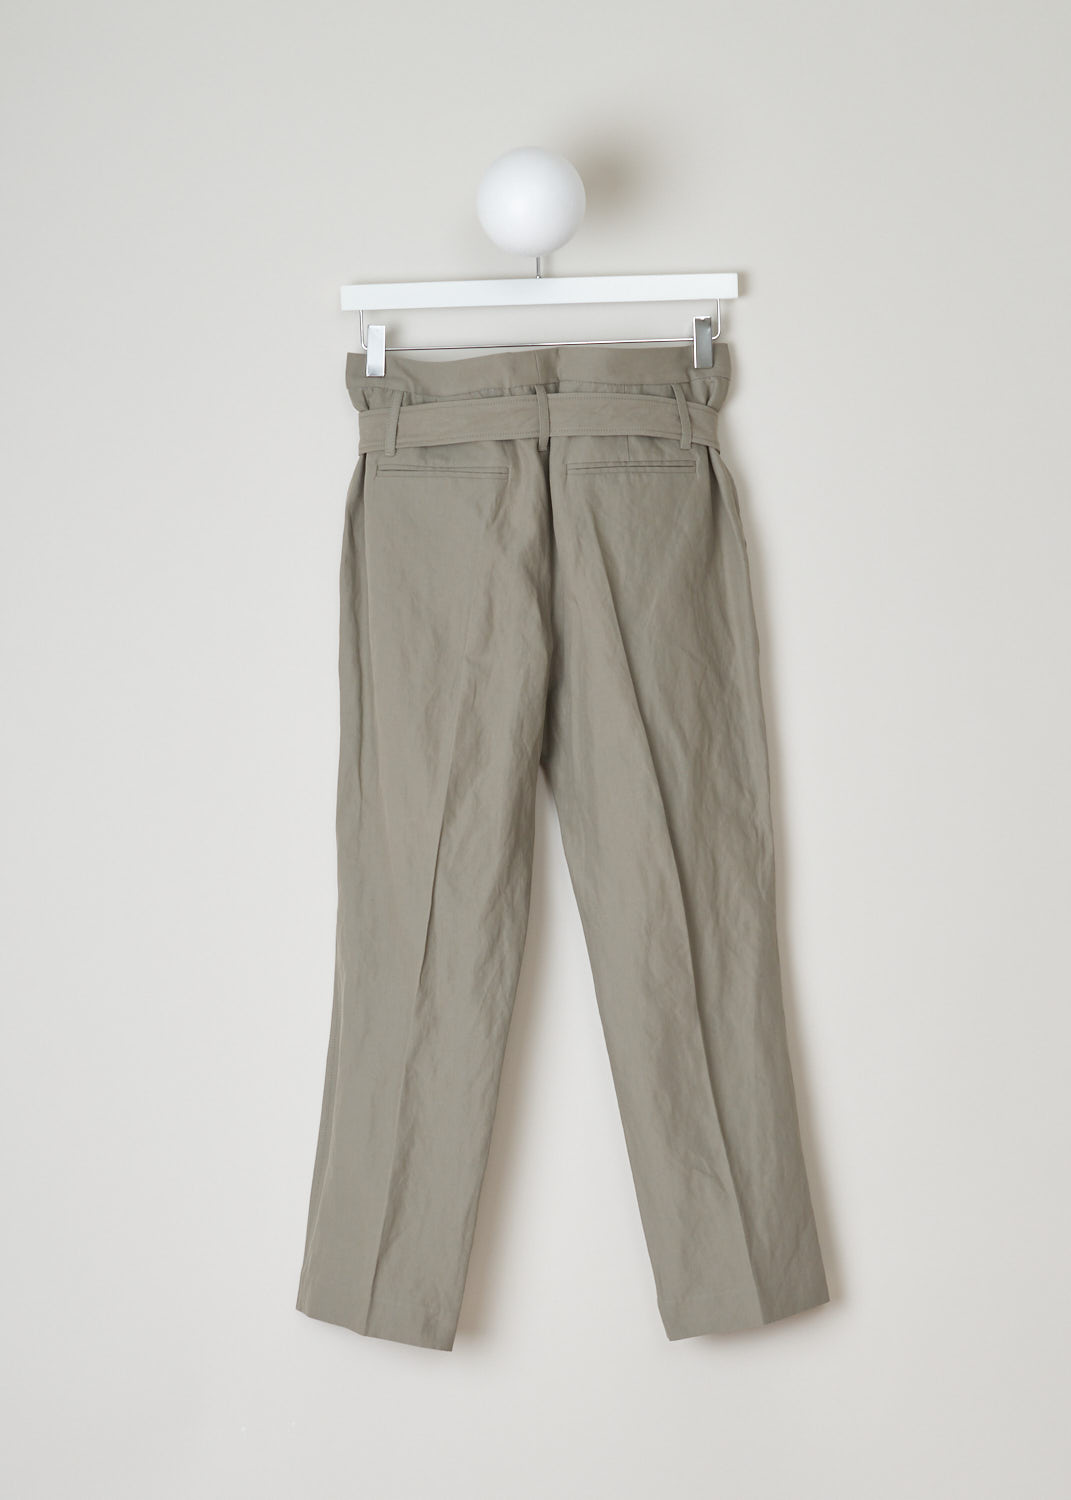 Brunello Cucinelli, khaki paperbag waist pants, M0H59P6542_C3673, green, back, High-waisted paperbag pants with a D-ring belt. The cropped length allows you to show off any shoe you wear. As a closure option, this model has a zipper with metal clip and backing buttons. At the front, these pants have two side pockets and two welt pockets at the back.